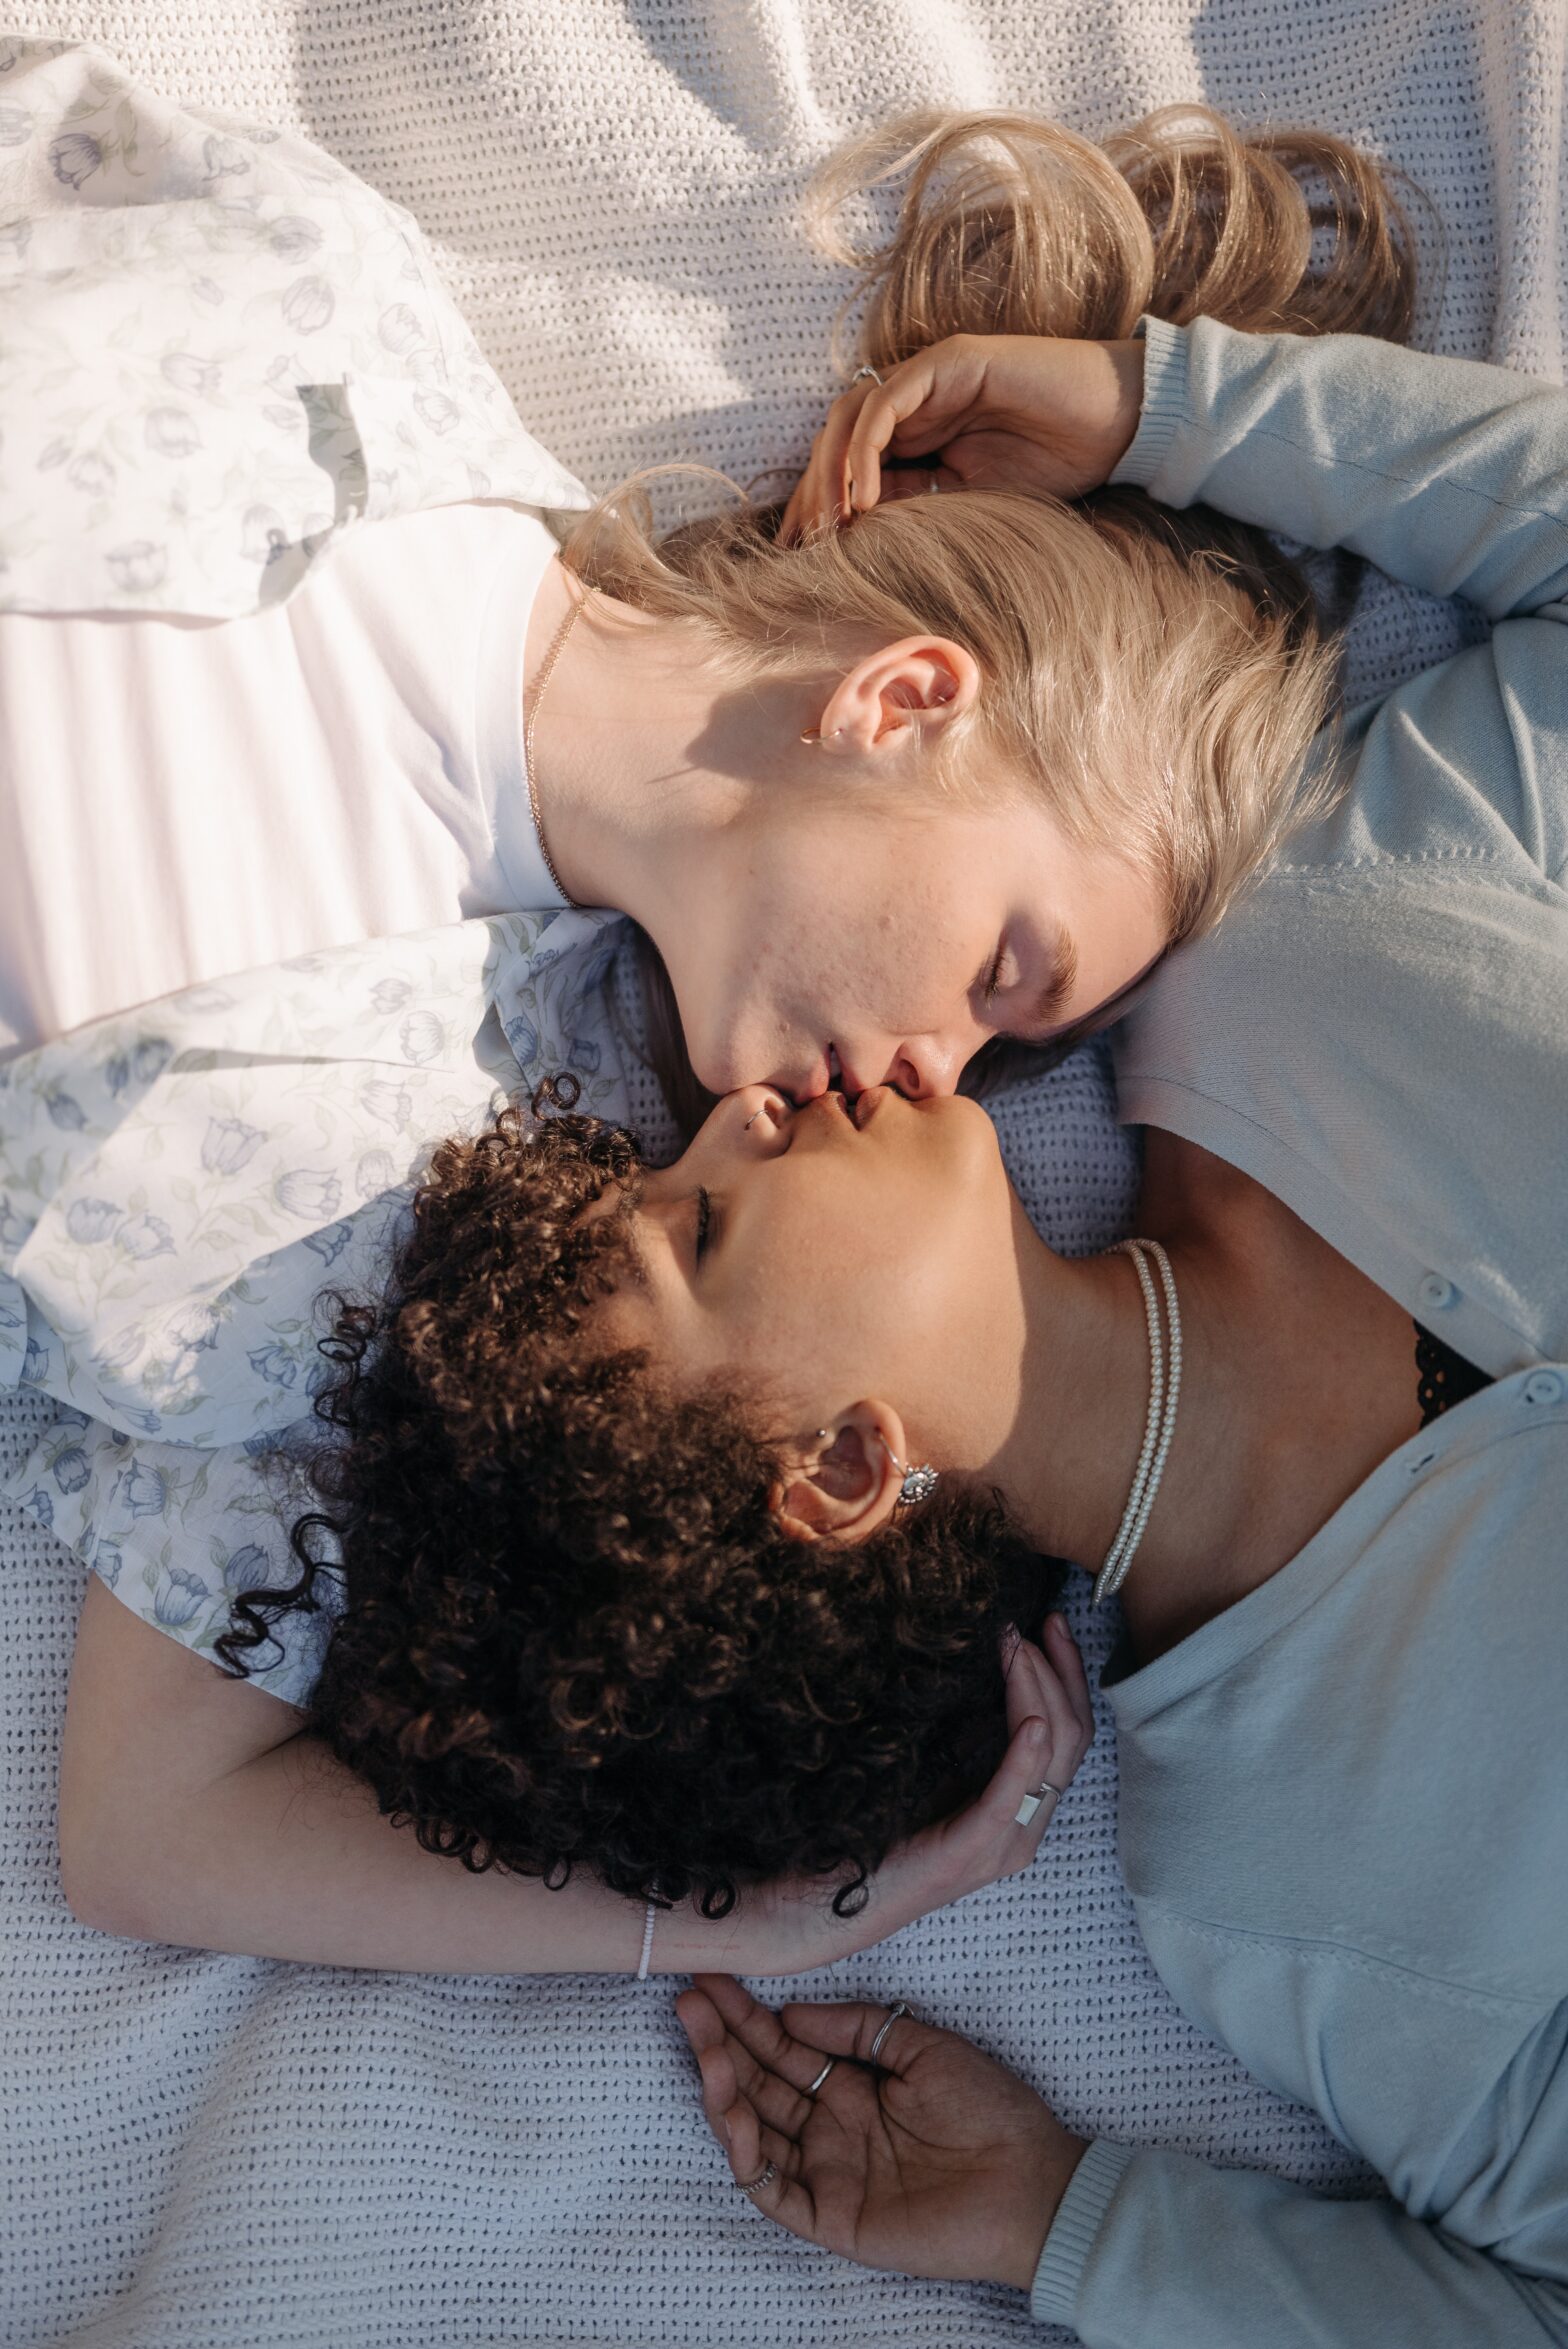 Here are 9 signs that define a "pillow princess."